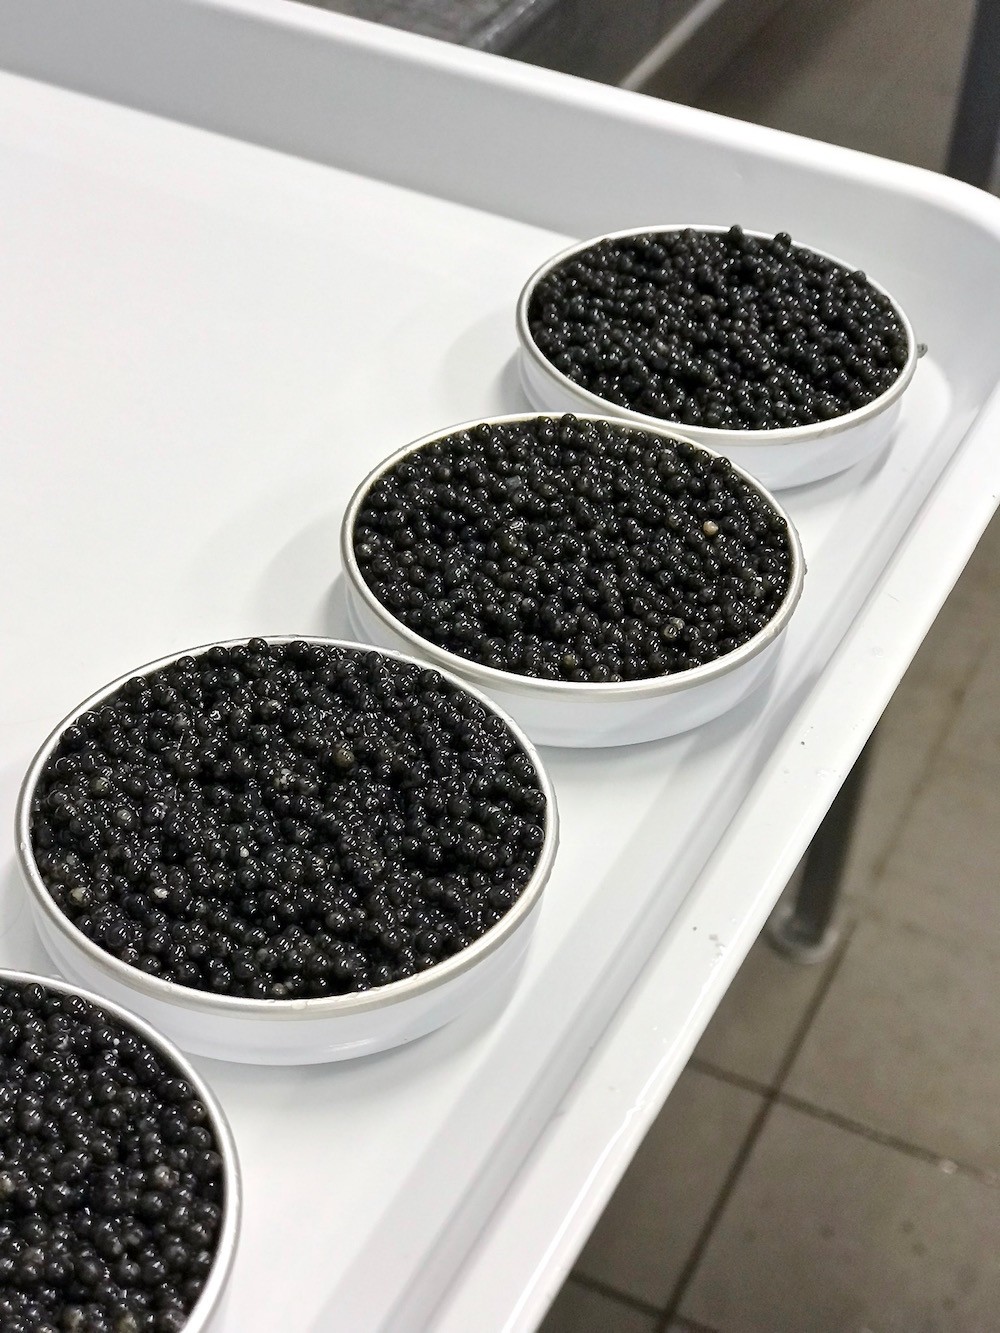 LE CAVIAR MADE IN FRANCE